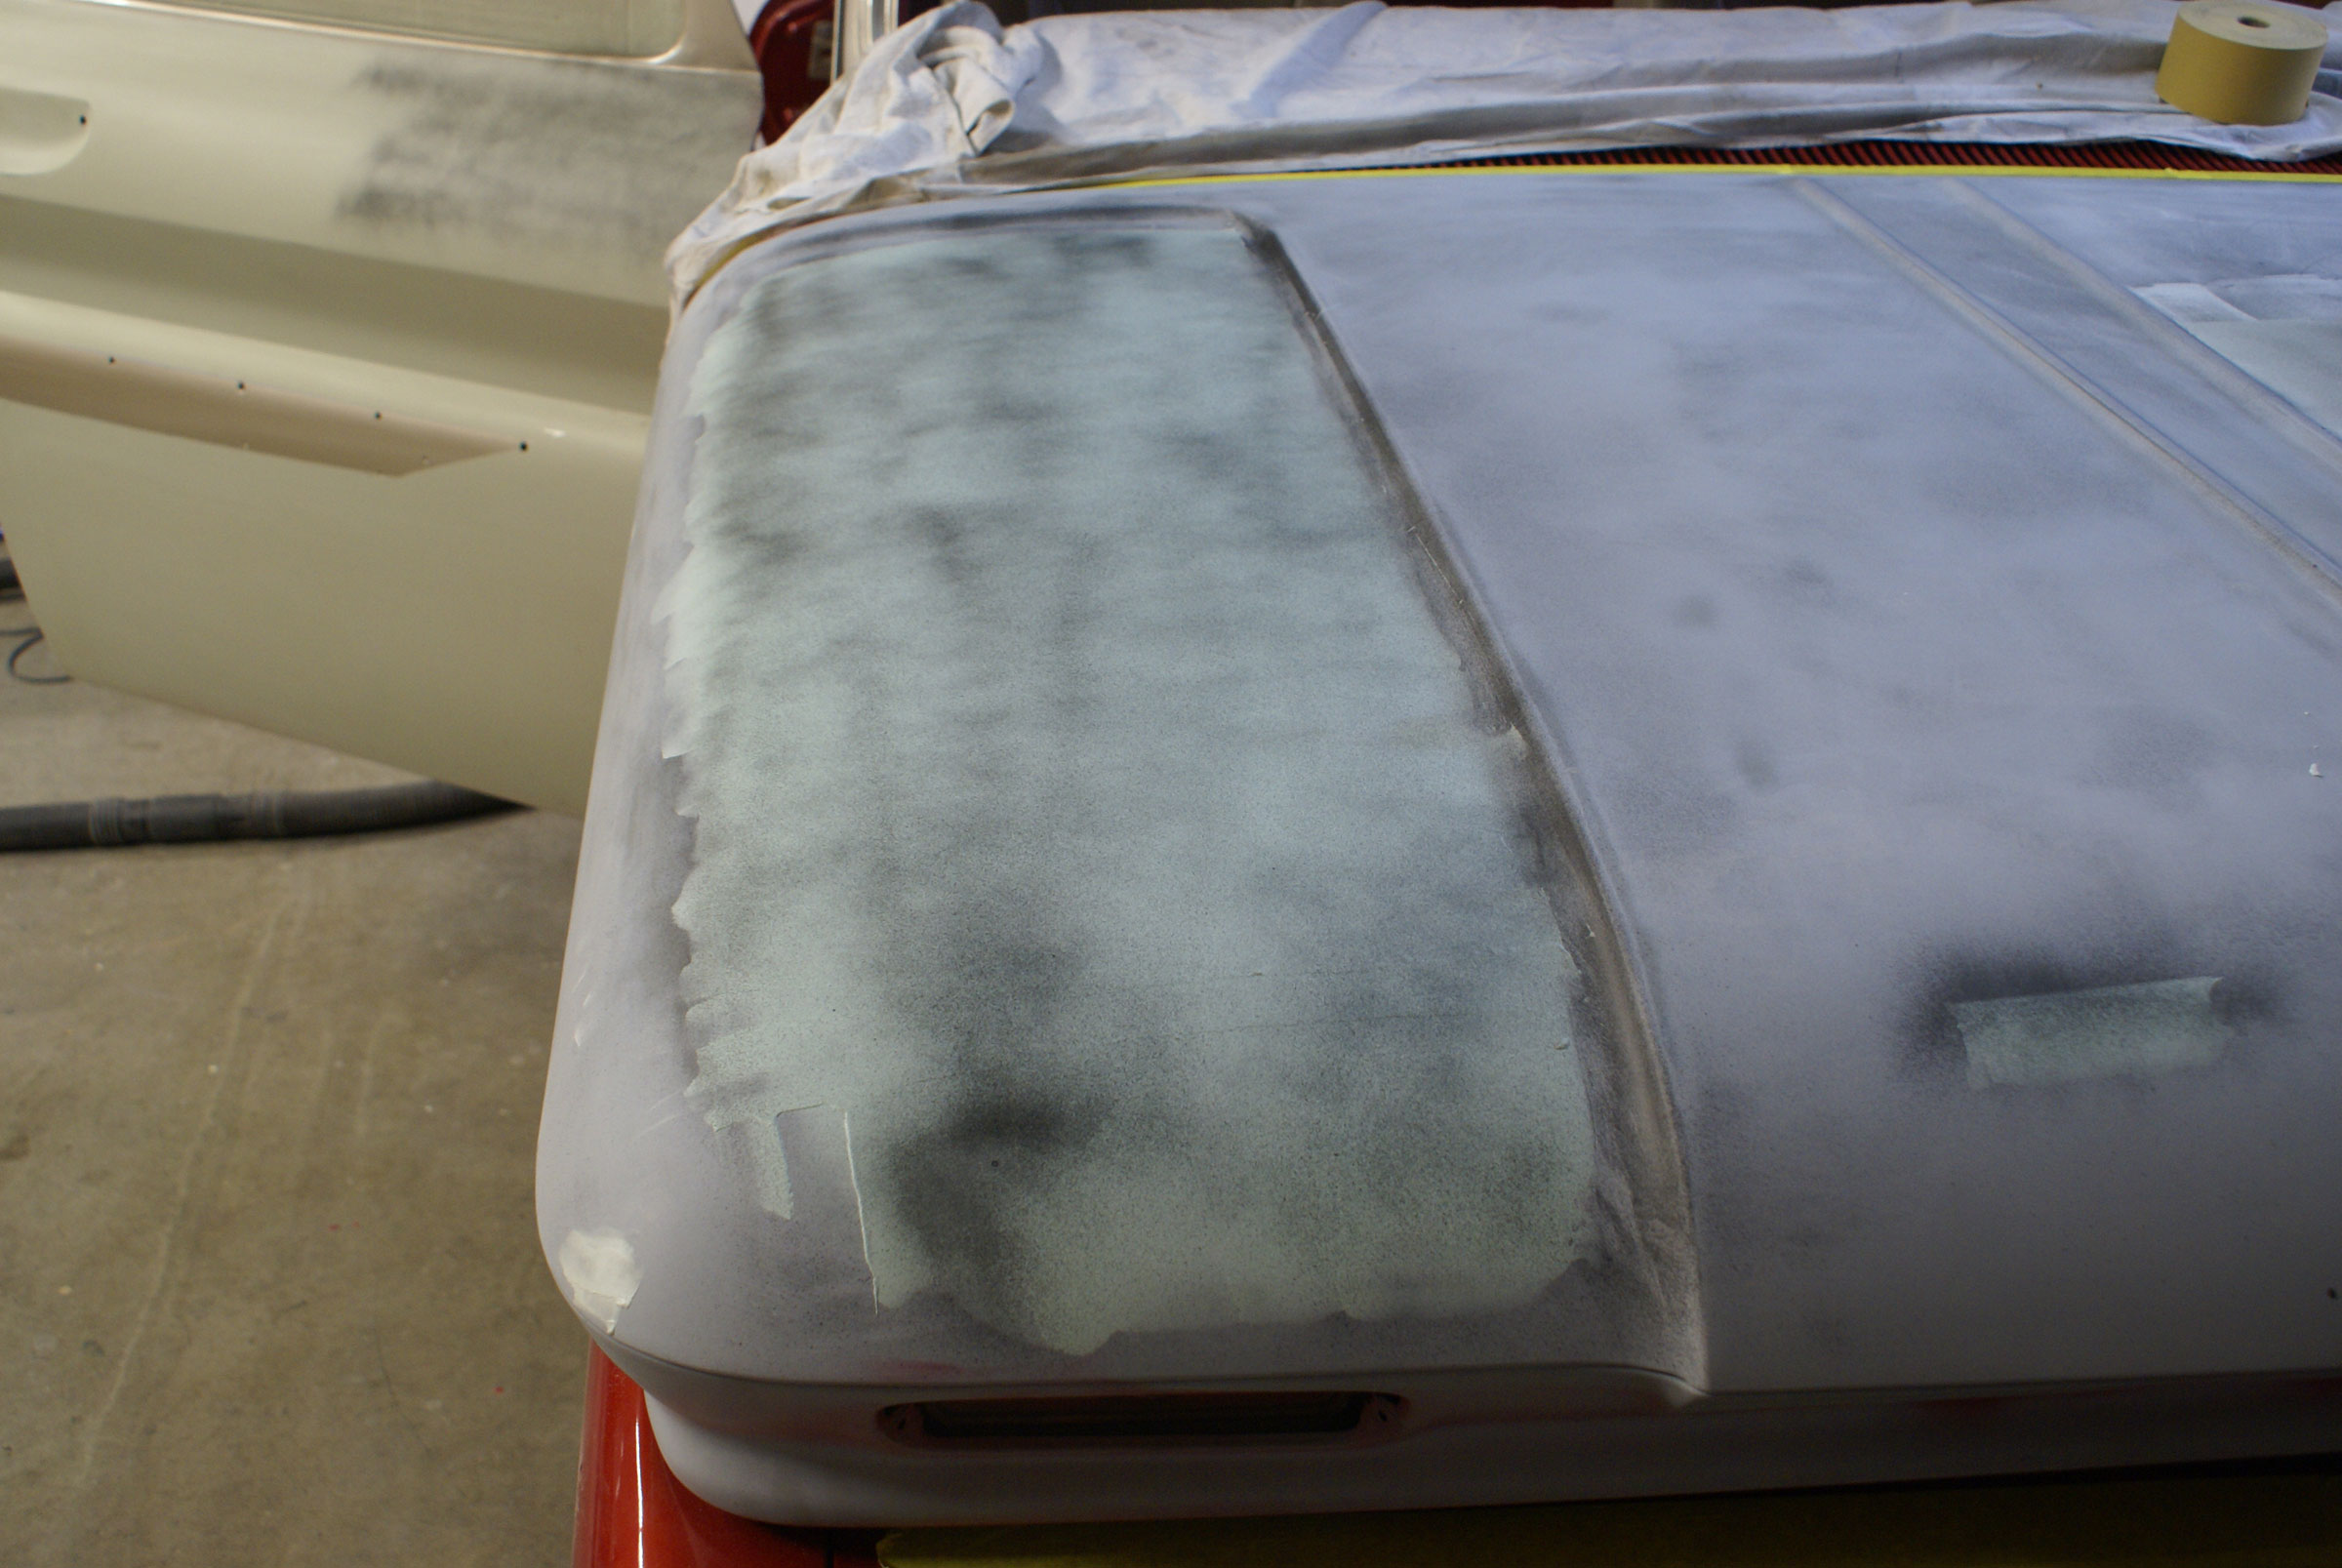 final block, filling, and sanding on hood